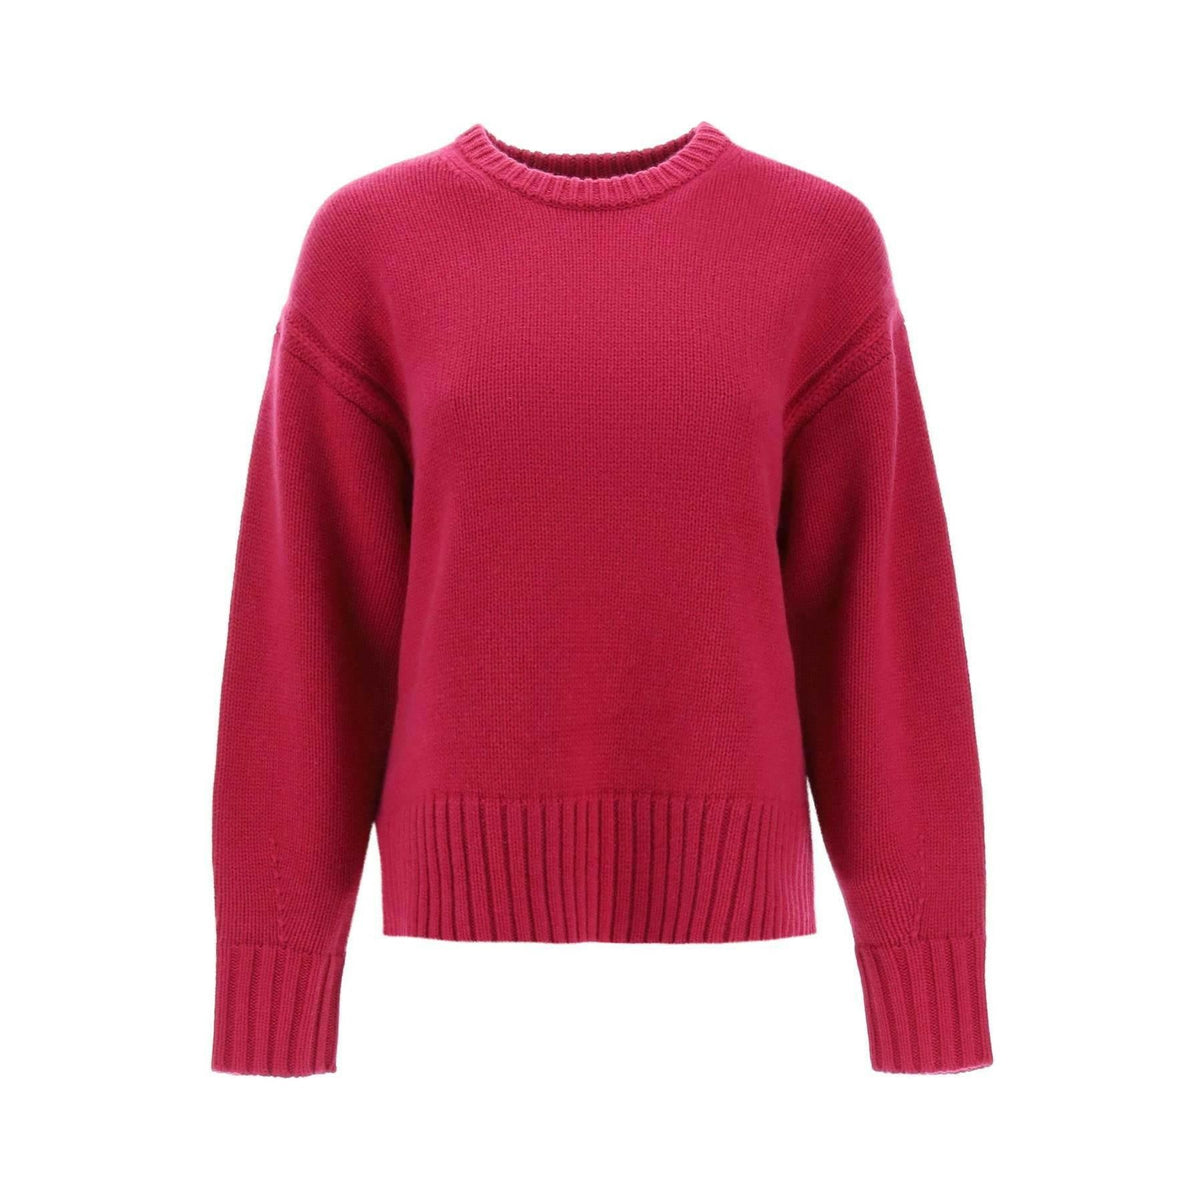 GUEST IN RESIDENCE - Magenta Cozy Cashmere Crew Neck Sweater - JOHN JULIA